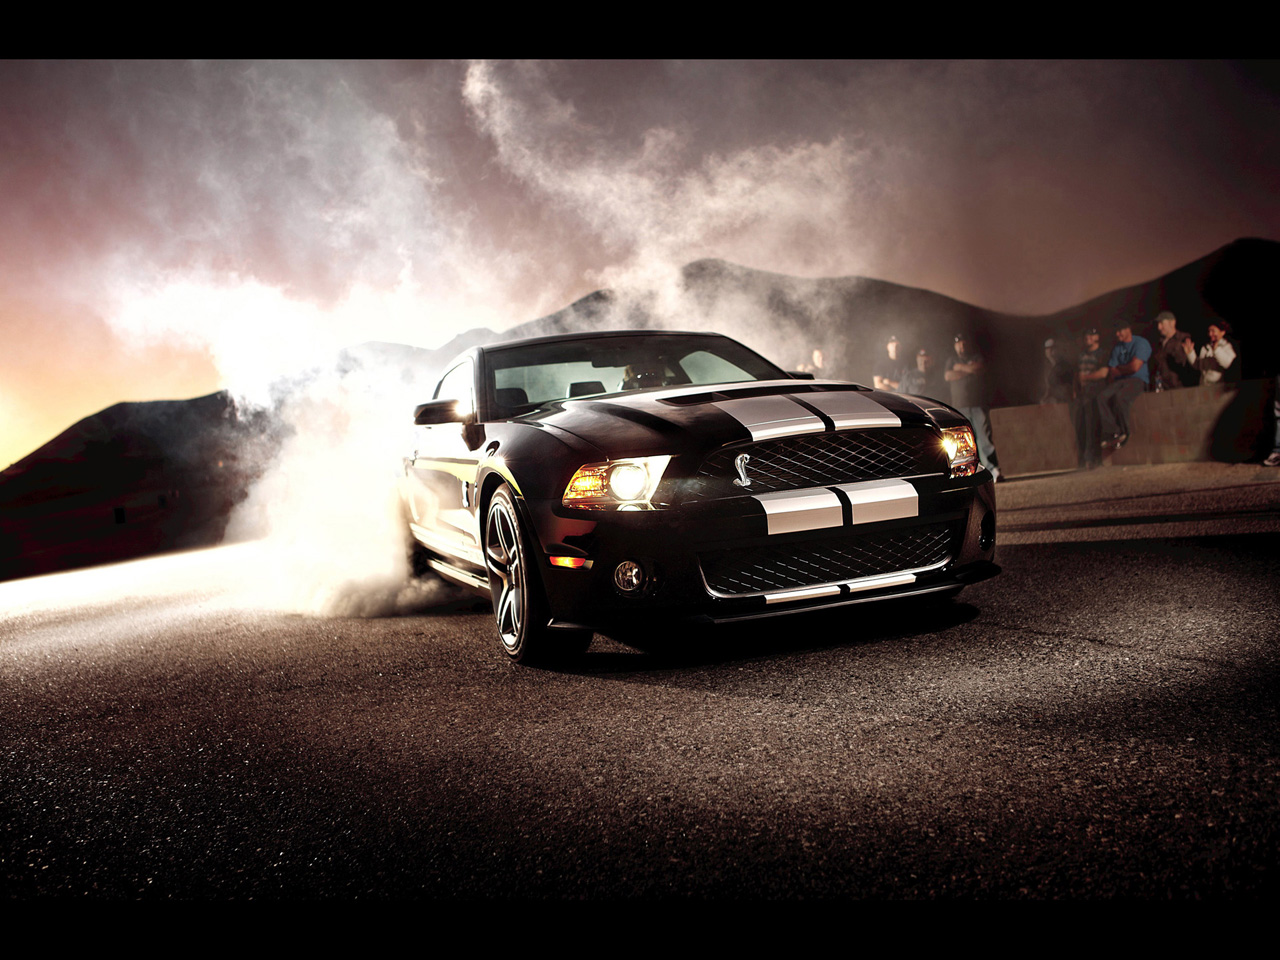  2012 Ford Shelby GT500  2012-Ford-Shelby-GT500-Front-Angle-Smoke-1280x960